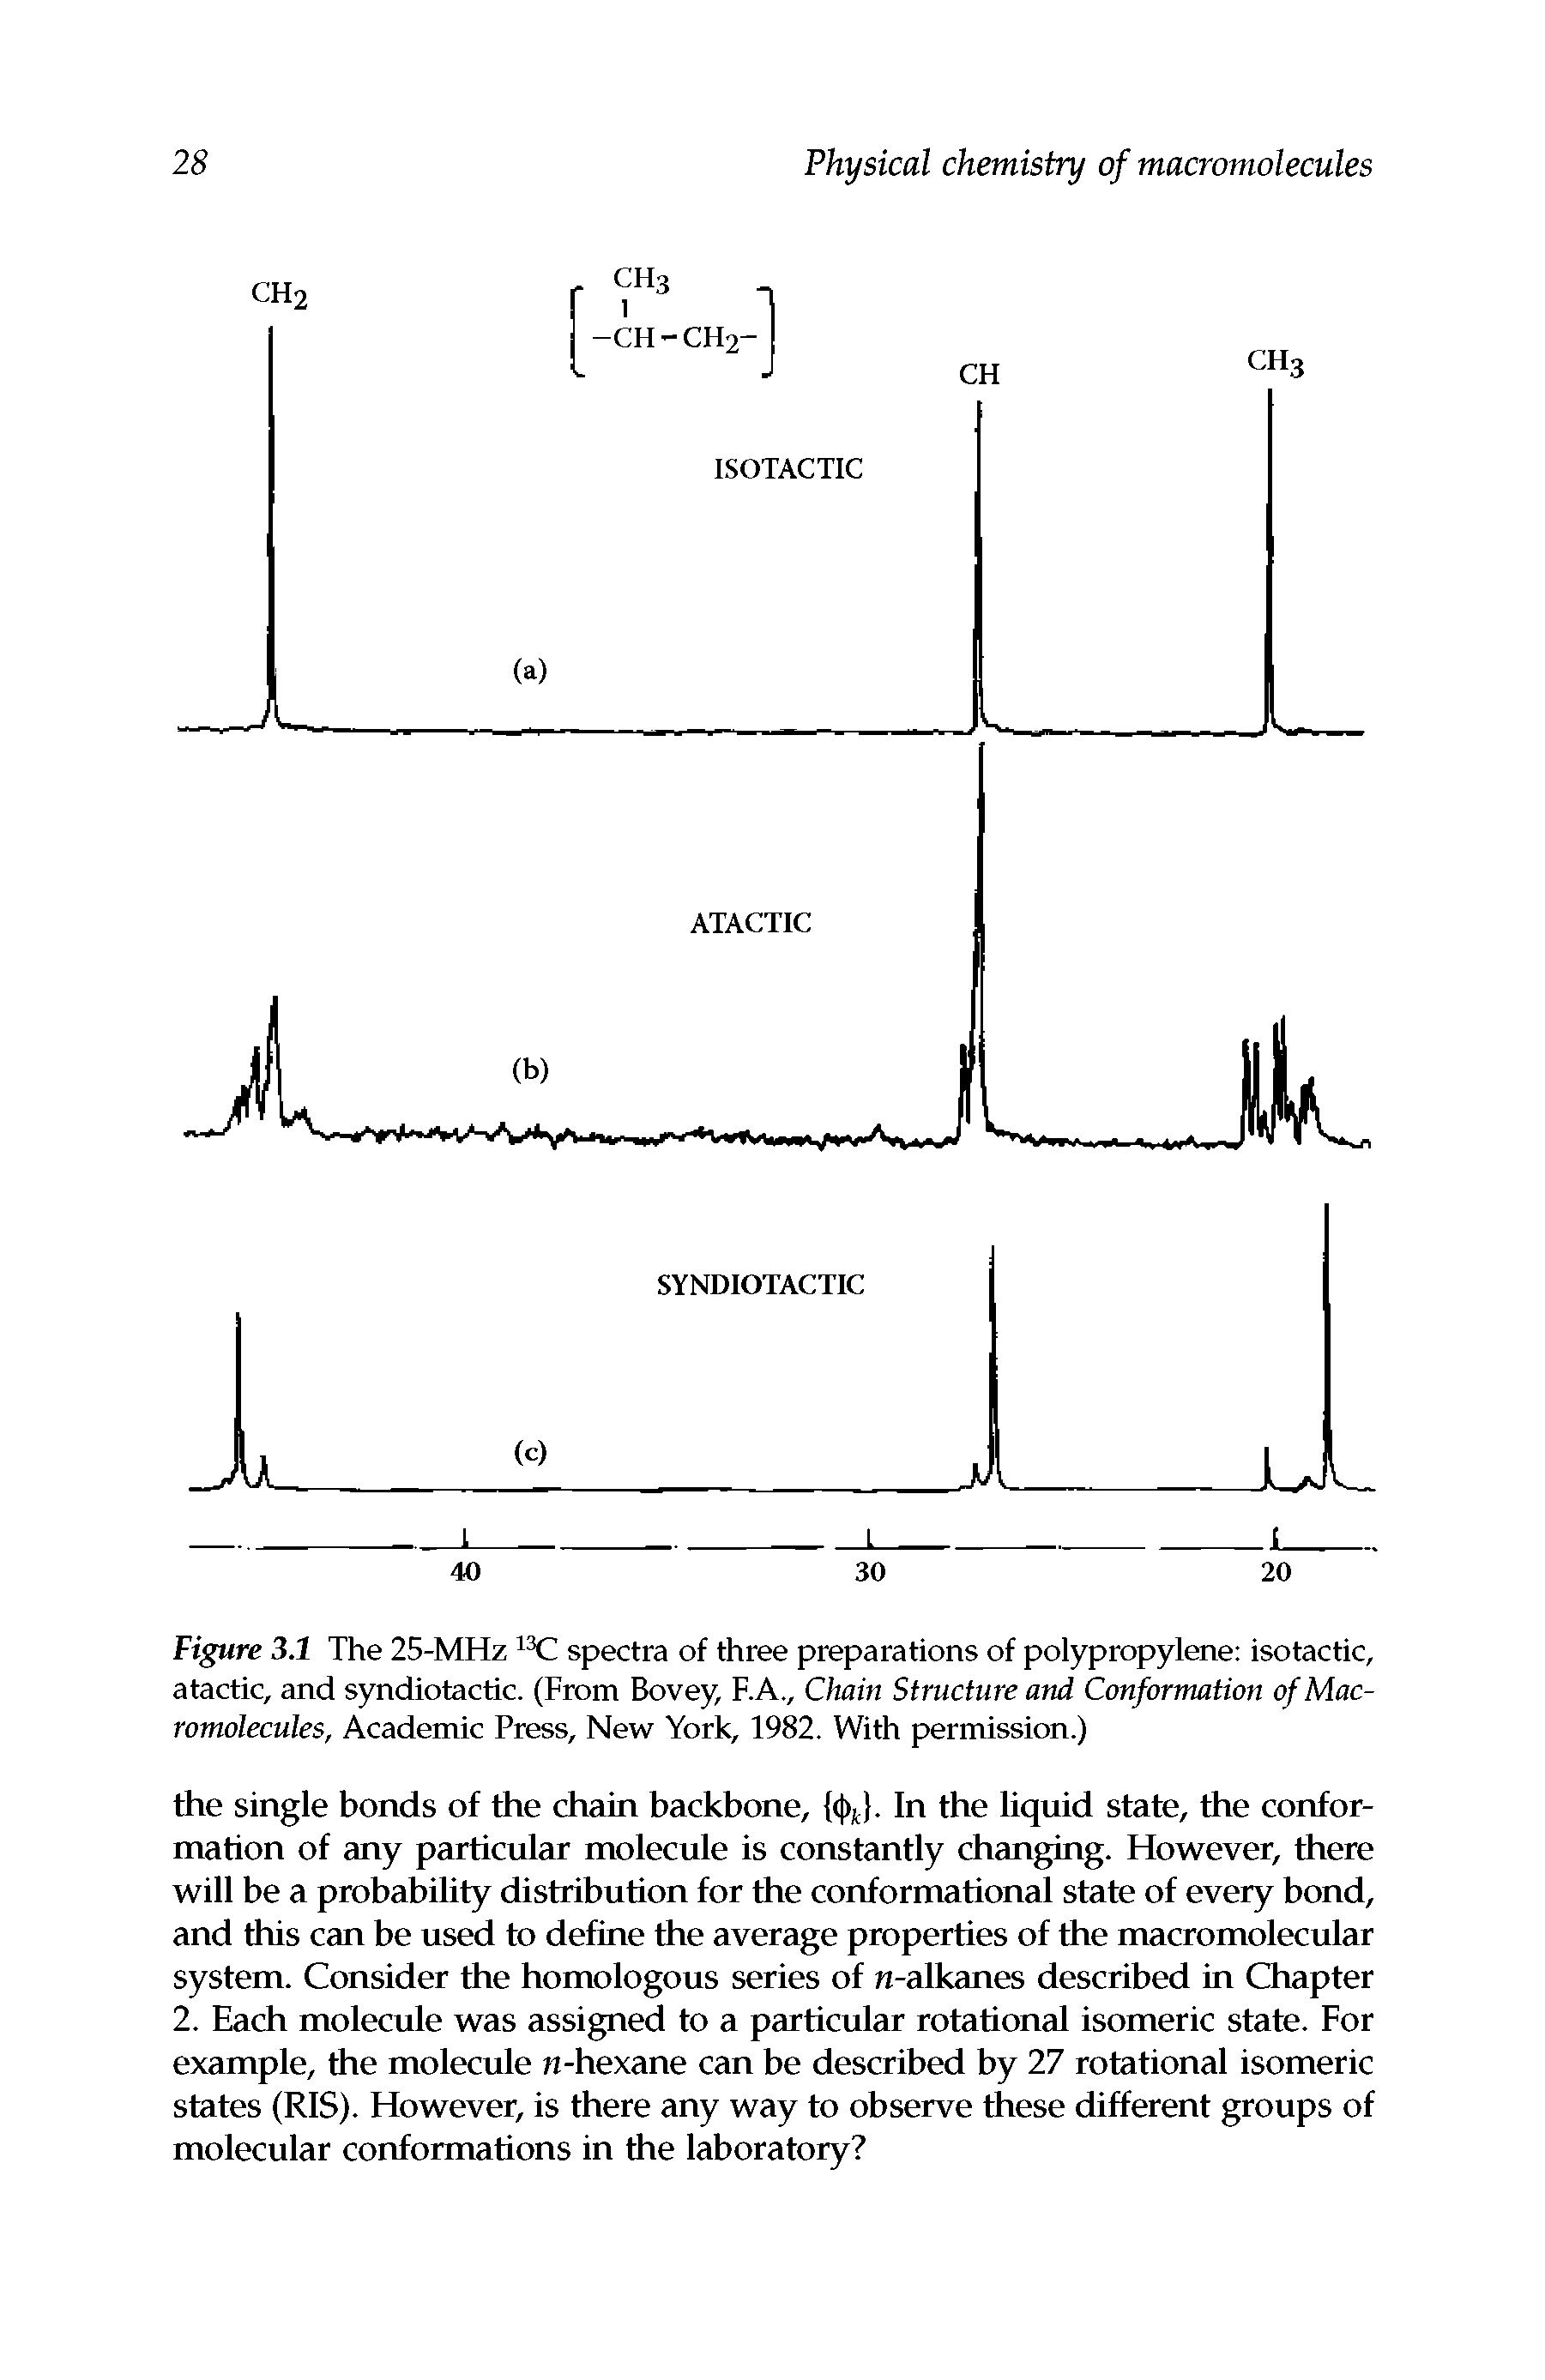 Figure 3.1 The 25-MHz spectra of three preparations of polypropylene isotactic, atactic, and syndiotactic. (From Bovey, F.A., Chain Structure and Conformation (f Macromolecules, Academic Press, New York, 1982. With permission.)...